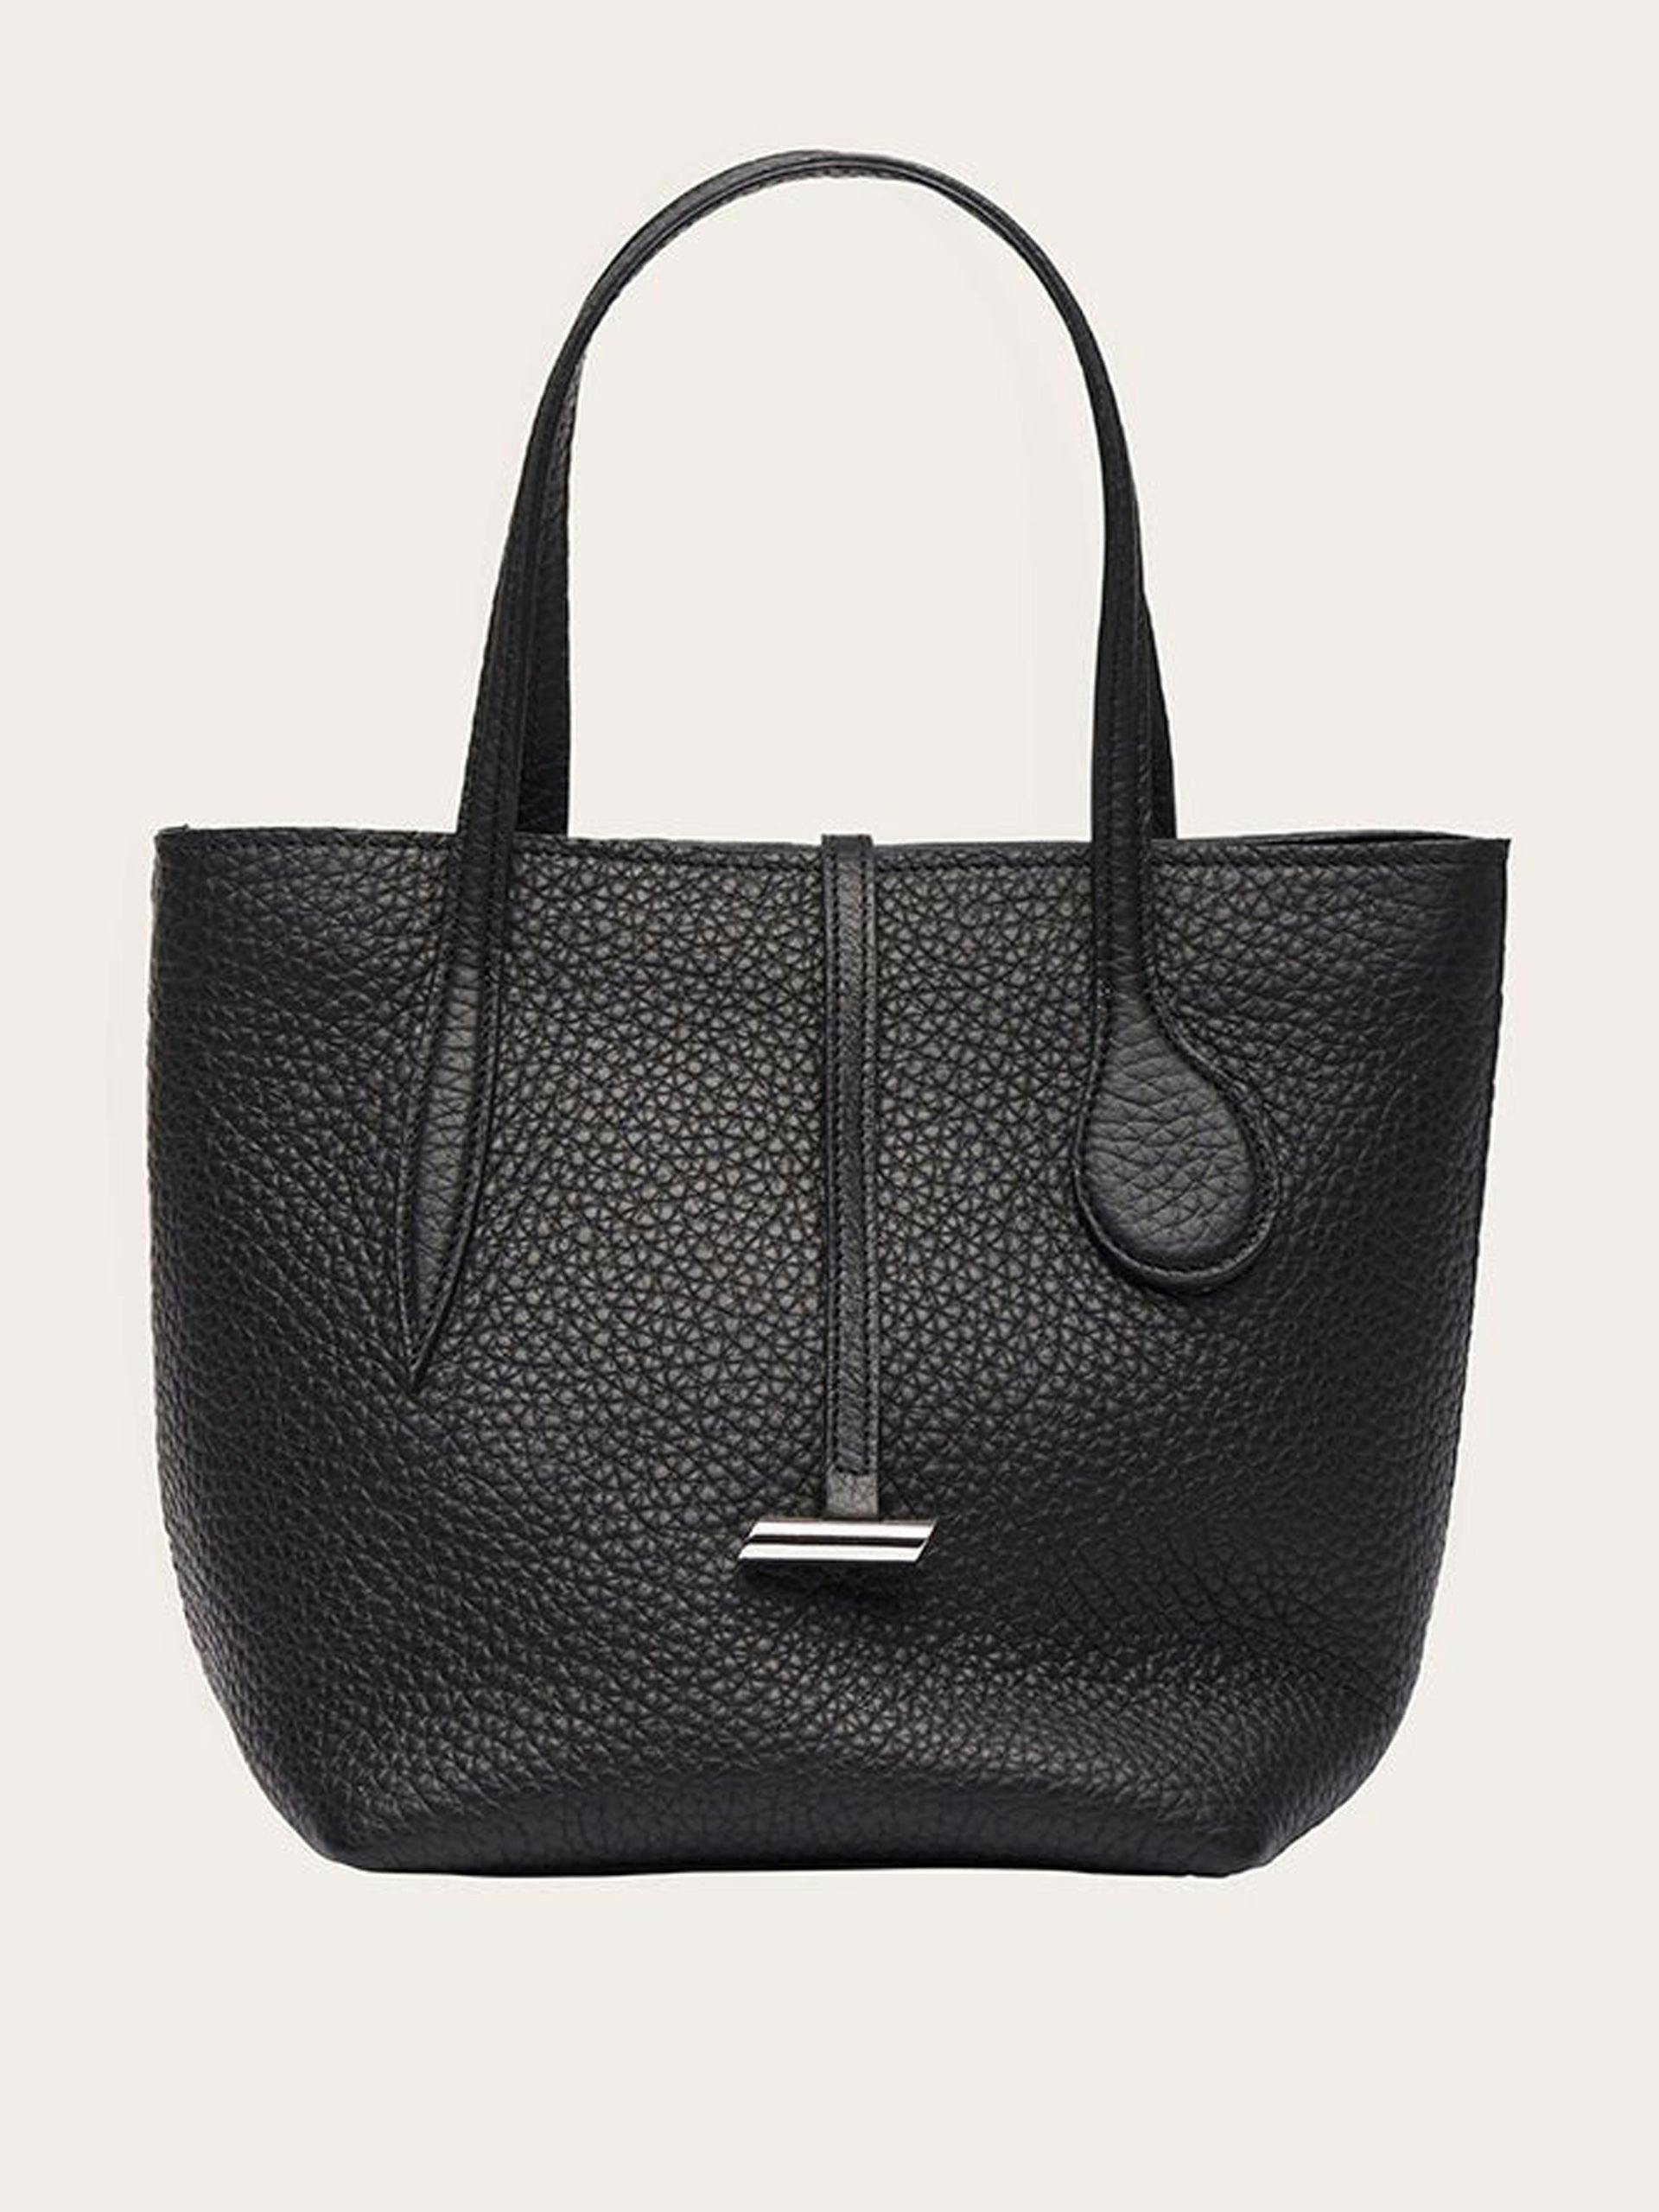 Black leather Sprout tote bag, mini